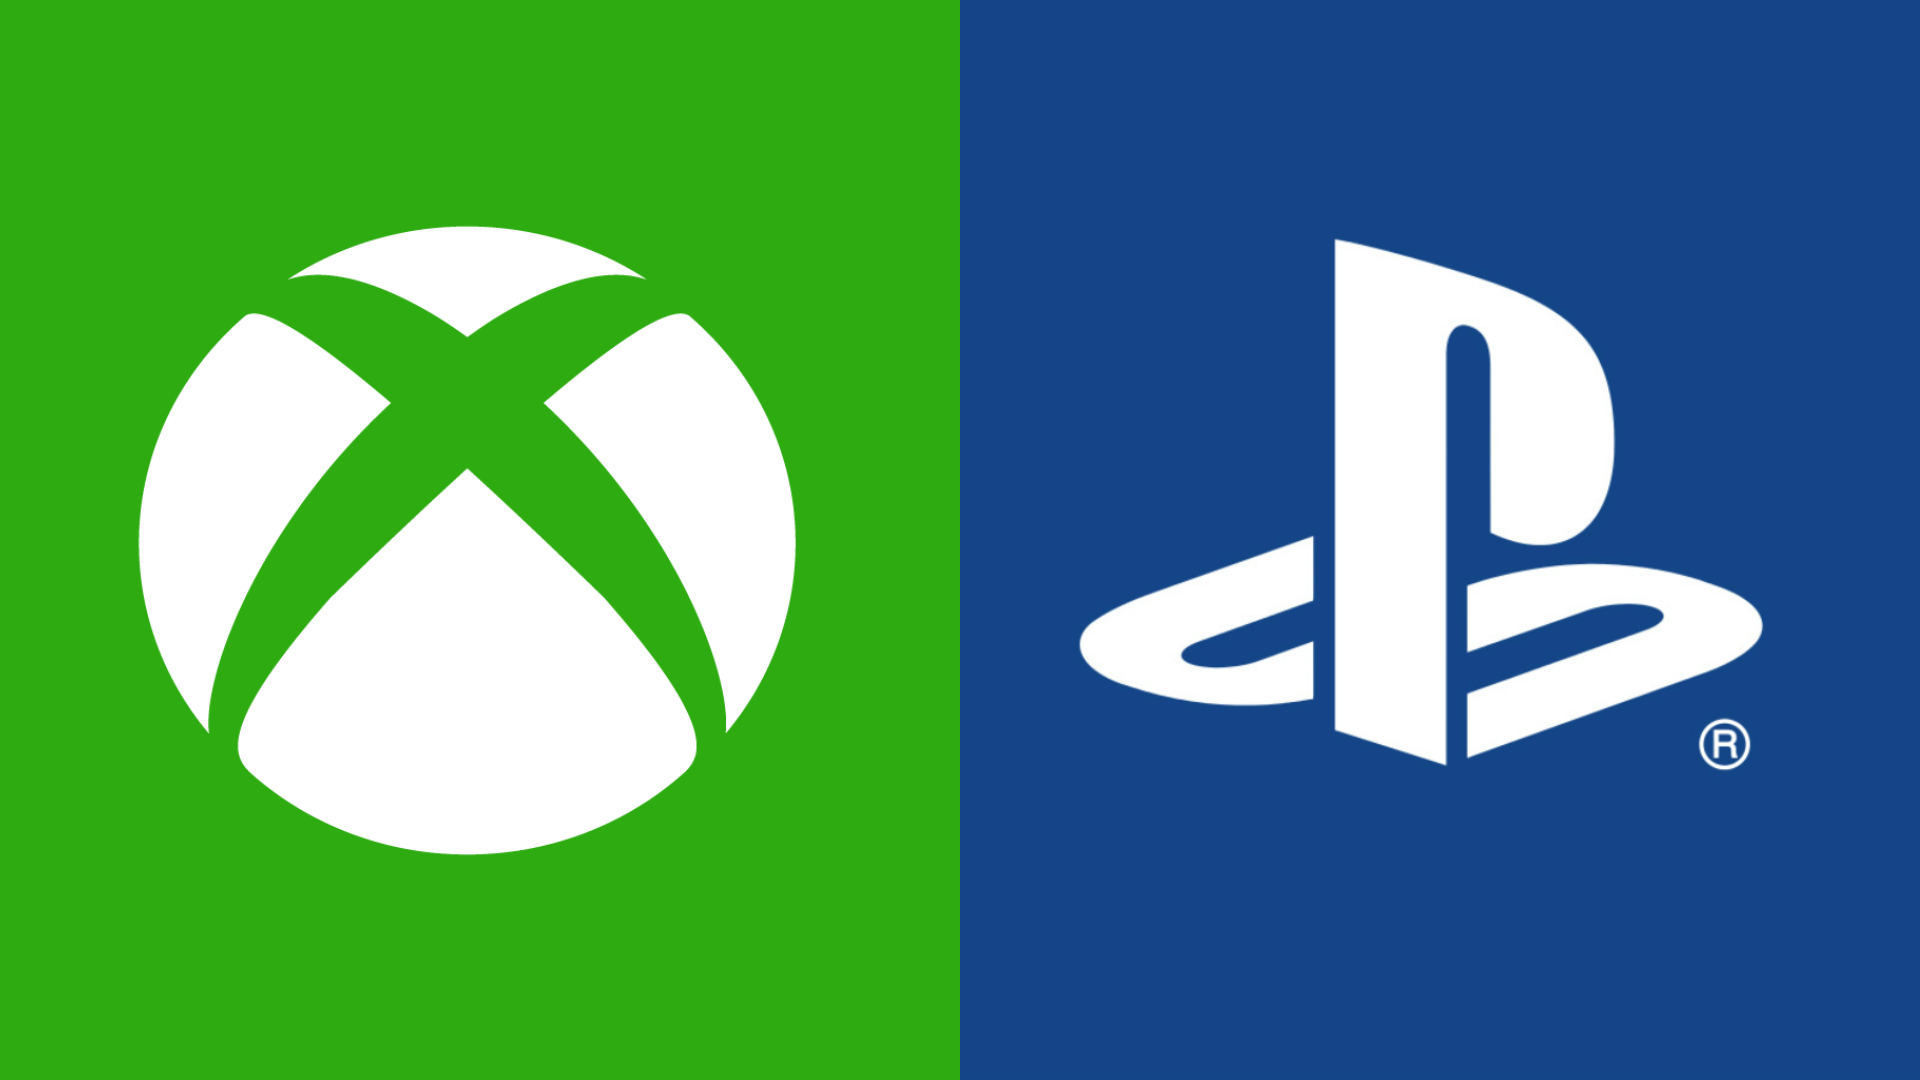 Xbox and PlayStation: Microsoft and Sony's history in video games